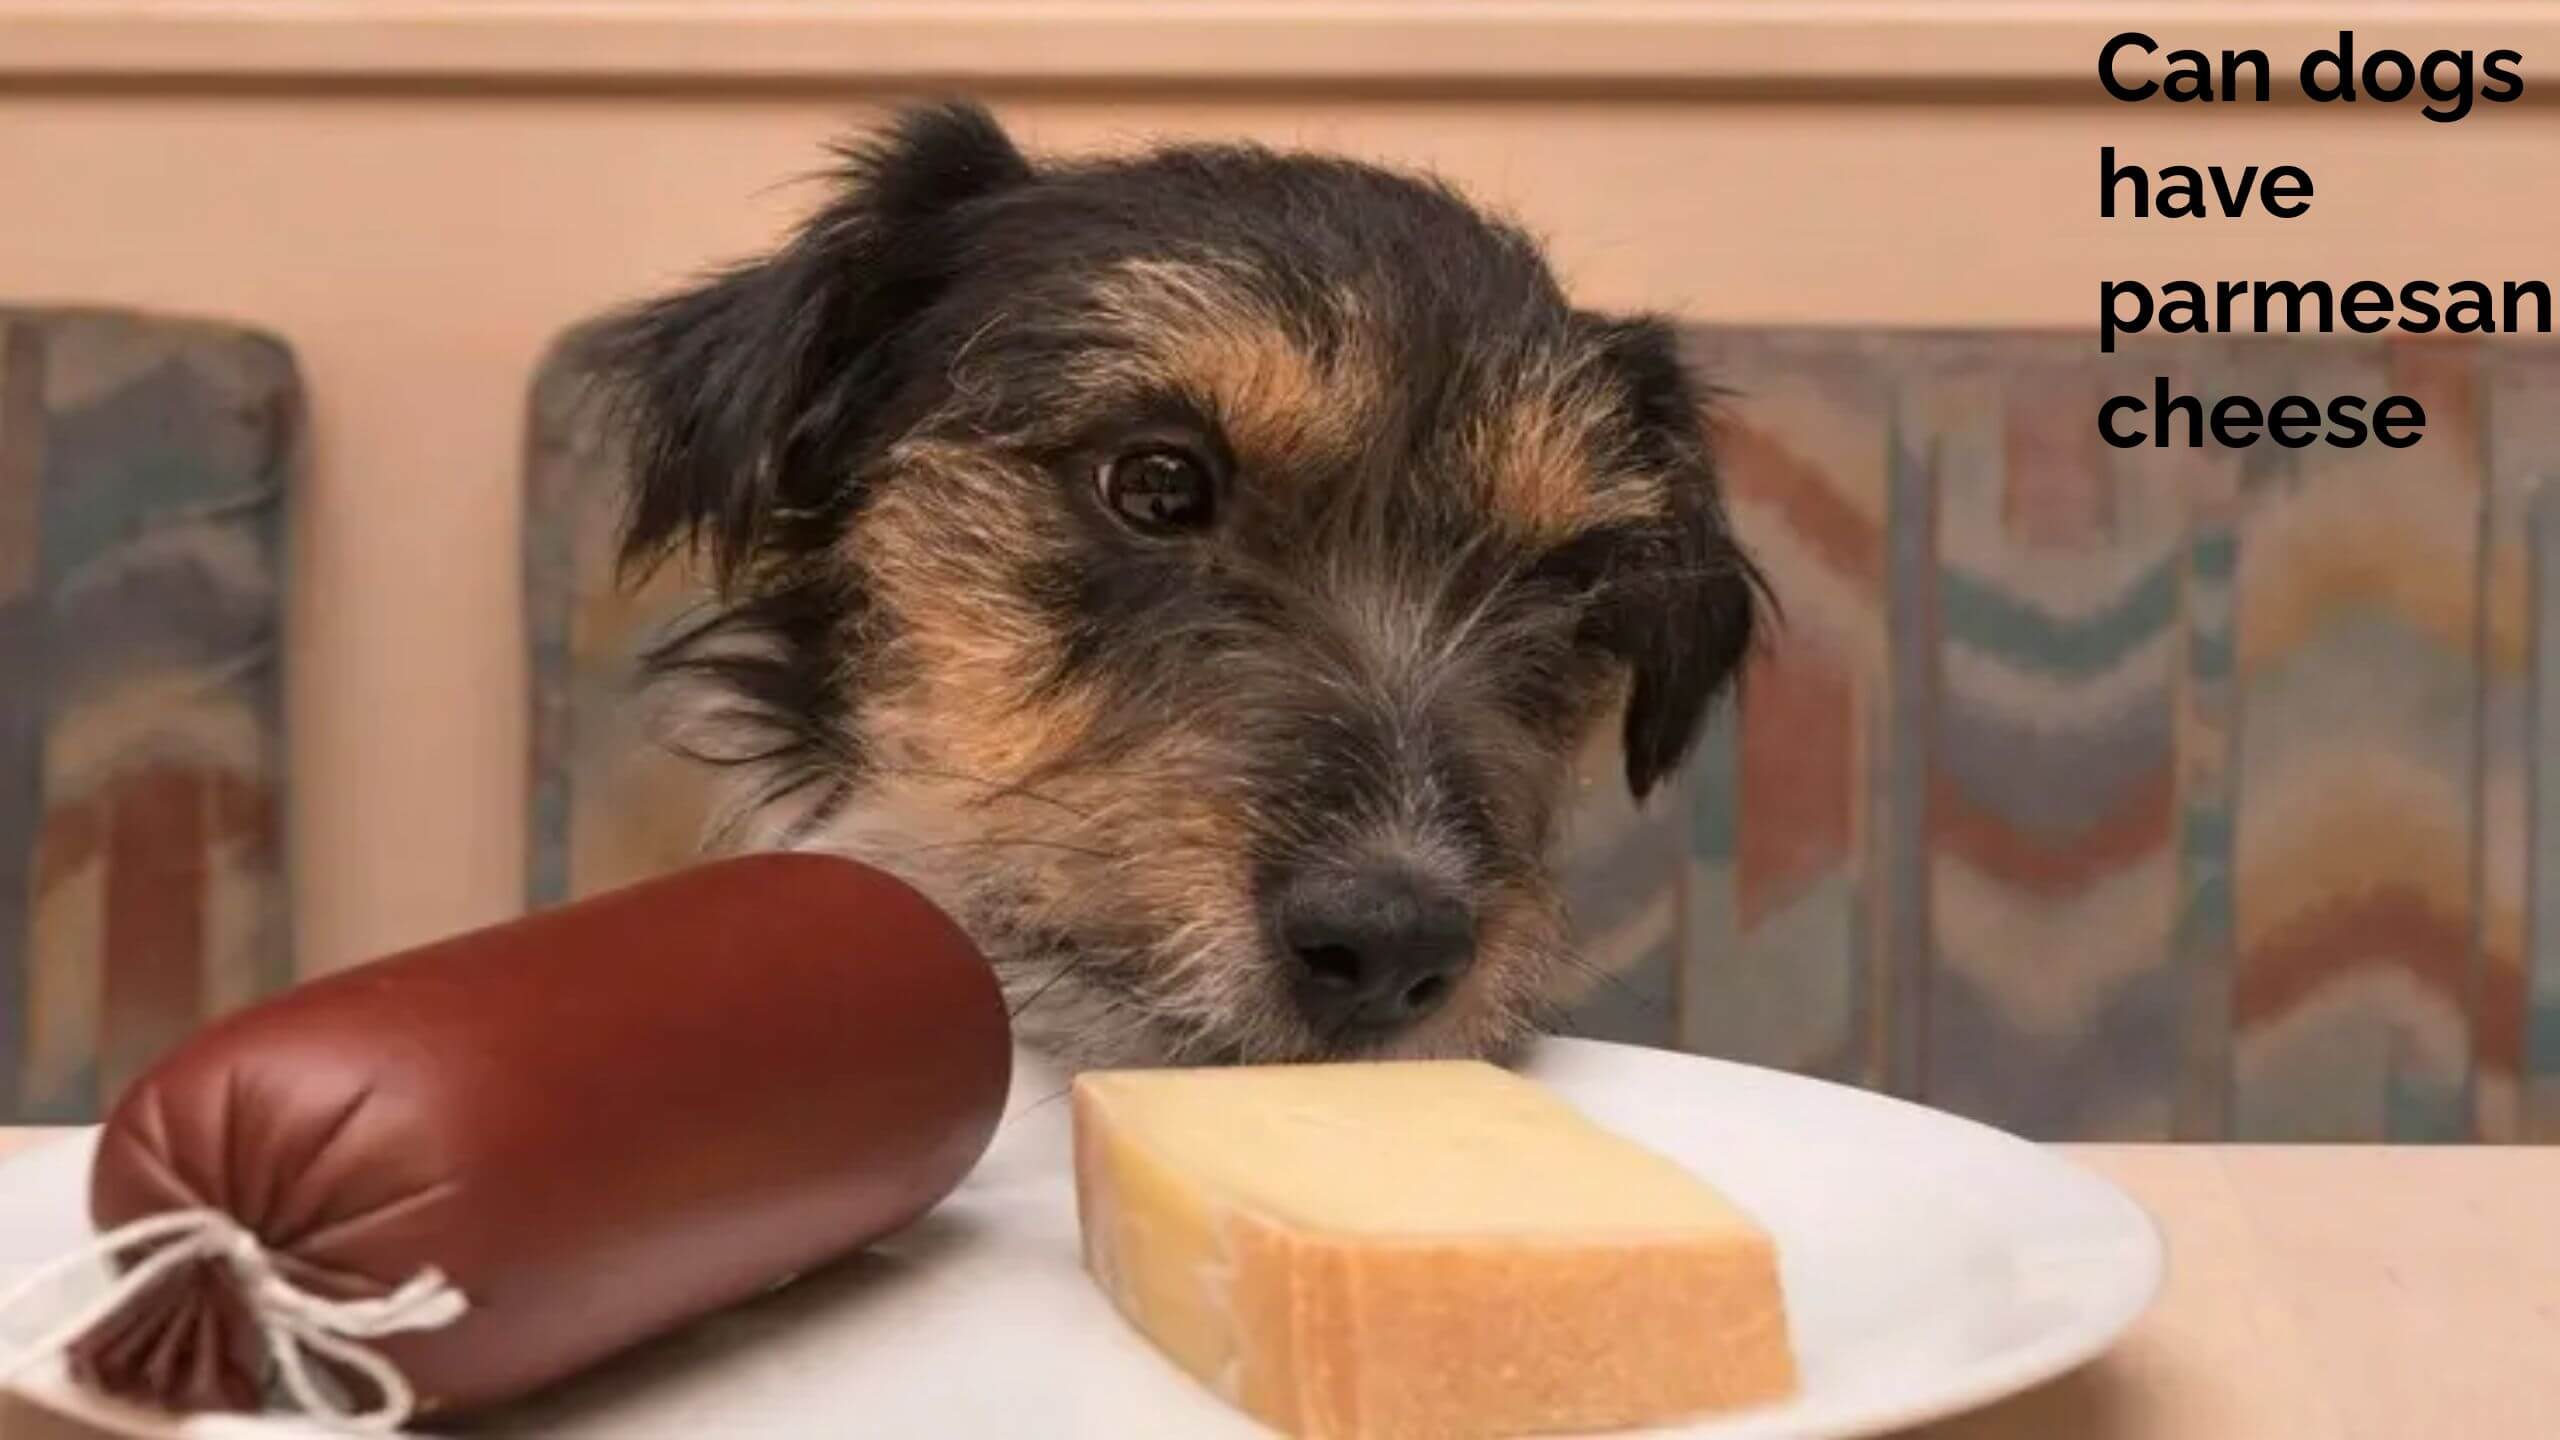 Can dogs have parmesan cheese